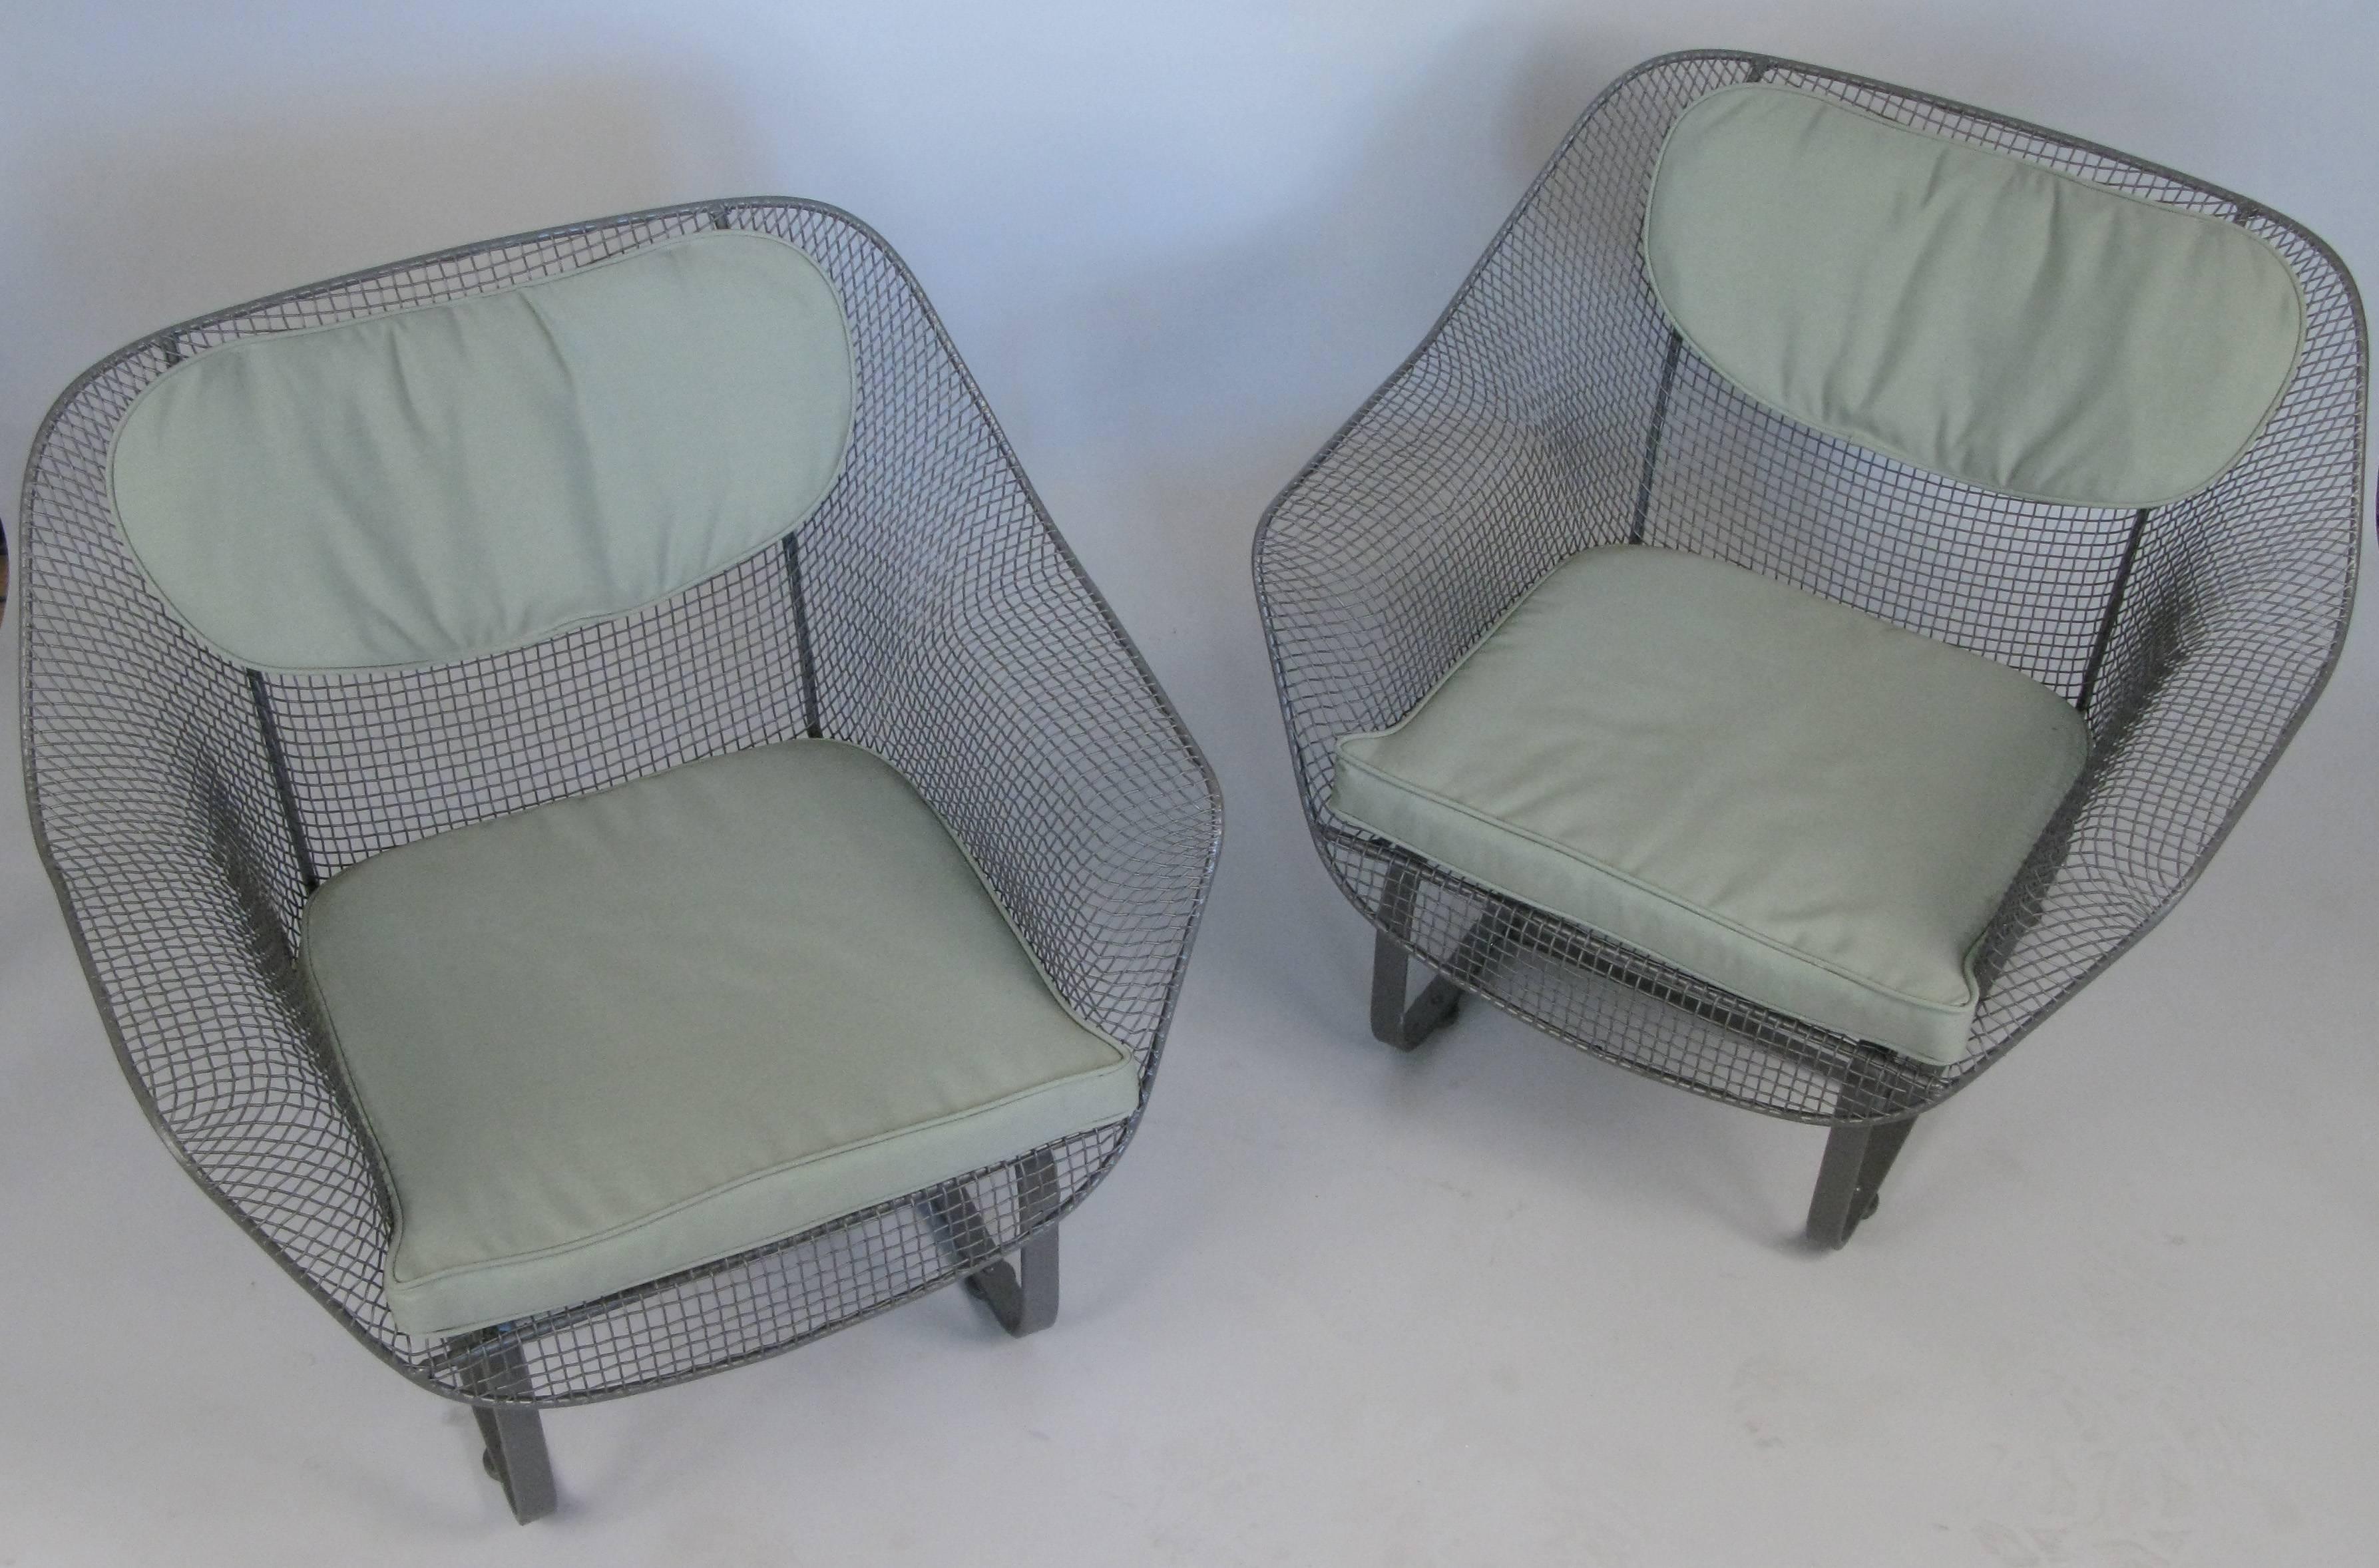 a pair of Classic vintage 1950's 'Sculptura' garden Lounge Chairs by Russell Woodard. the most comfortable and desirable of Russell Woodard's Classic and iconic 'Sculptura' collection, the lounge chair is formed entirely of woven steel mesh, mounted